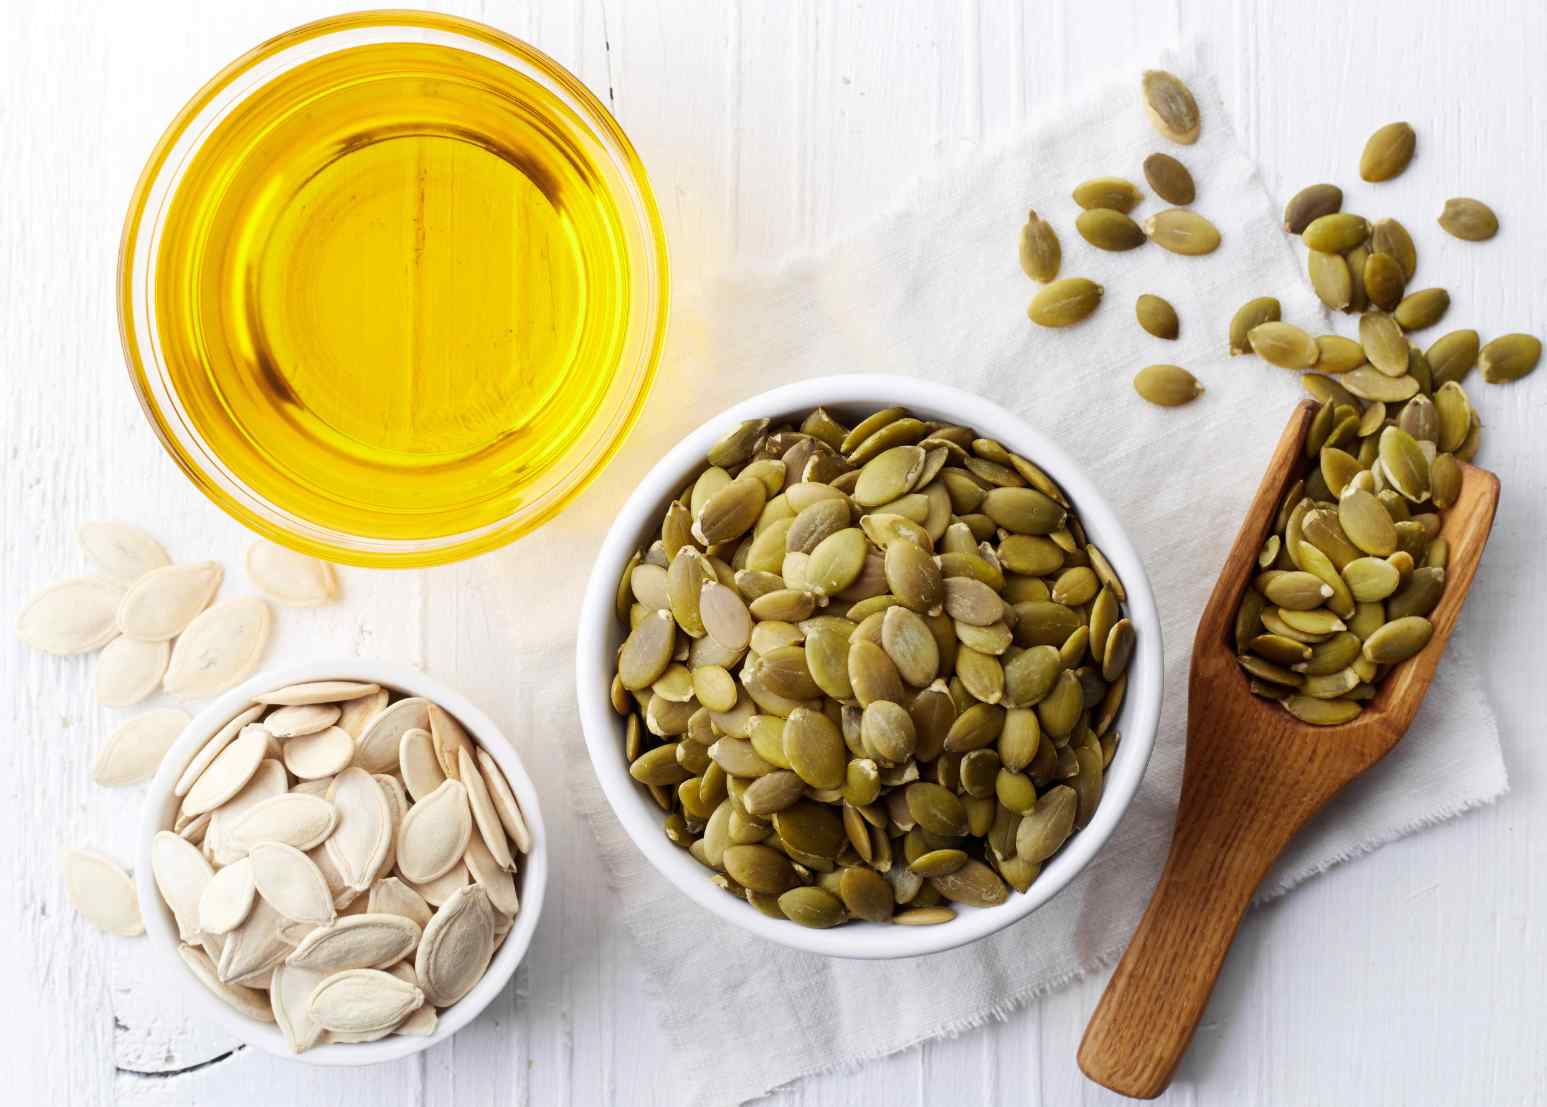 Pumpkin seed oil or pepita oil is extracted or cold-pressed from seeds.